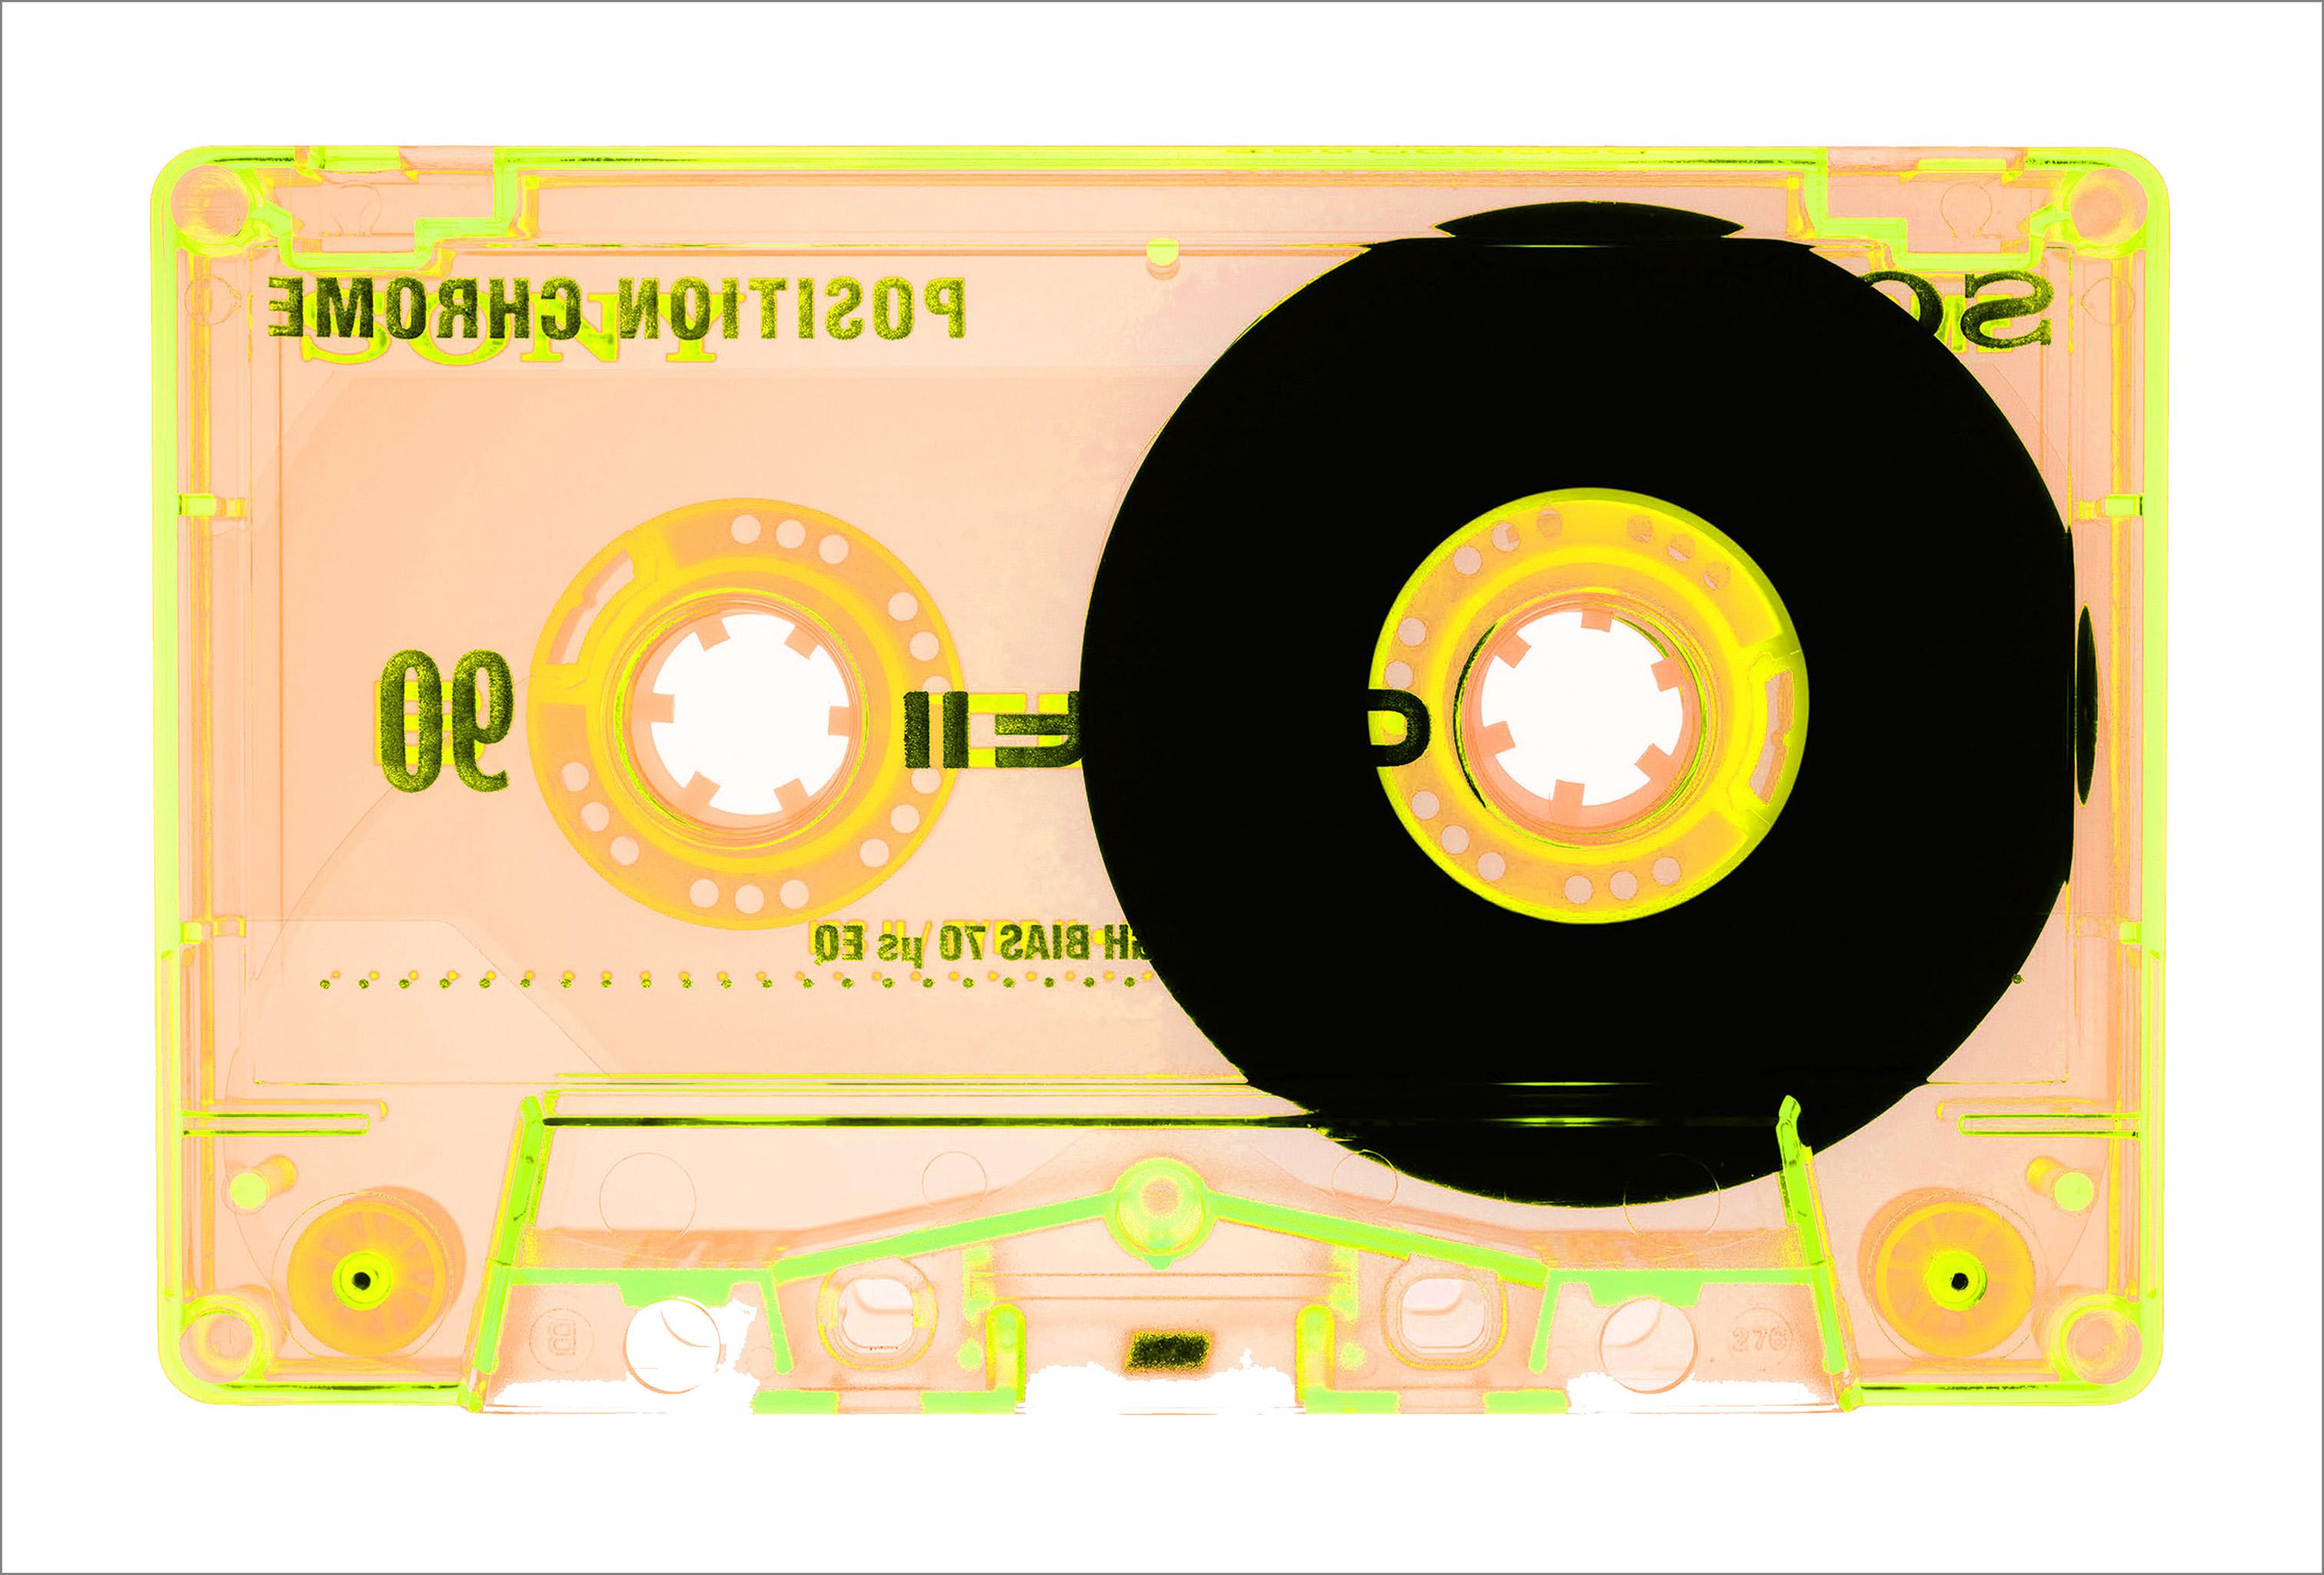 Heidler & Heeps Print - Tape Collection, Chrome Tutti Frutti - Contemporary Pop Art Color Photography